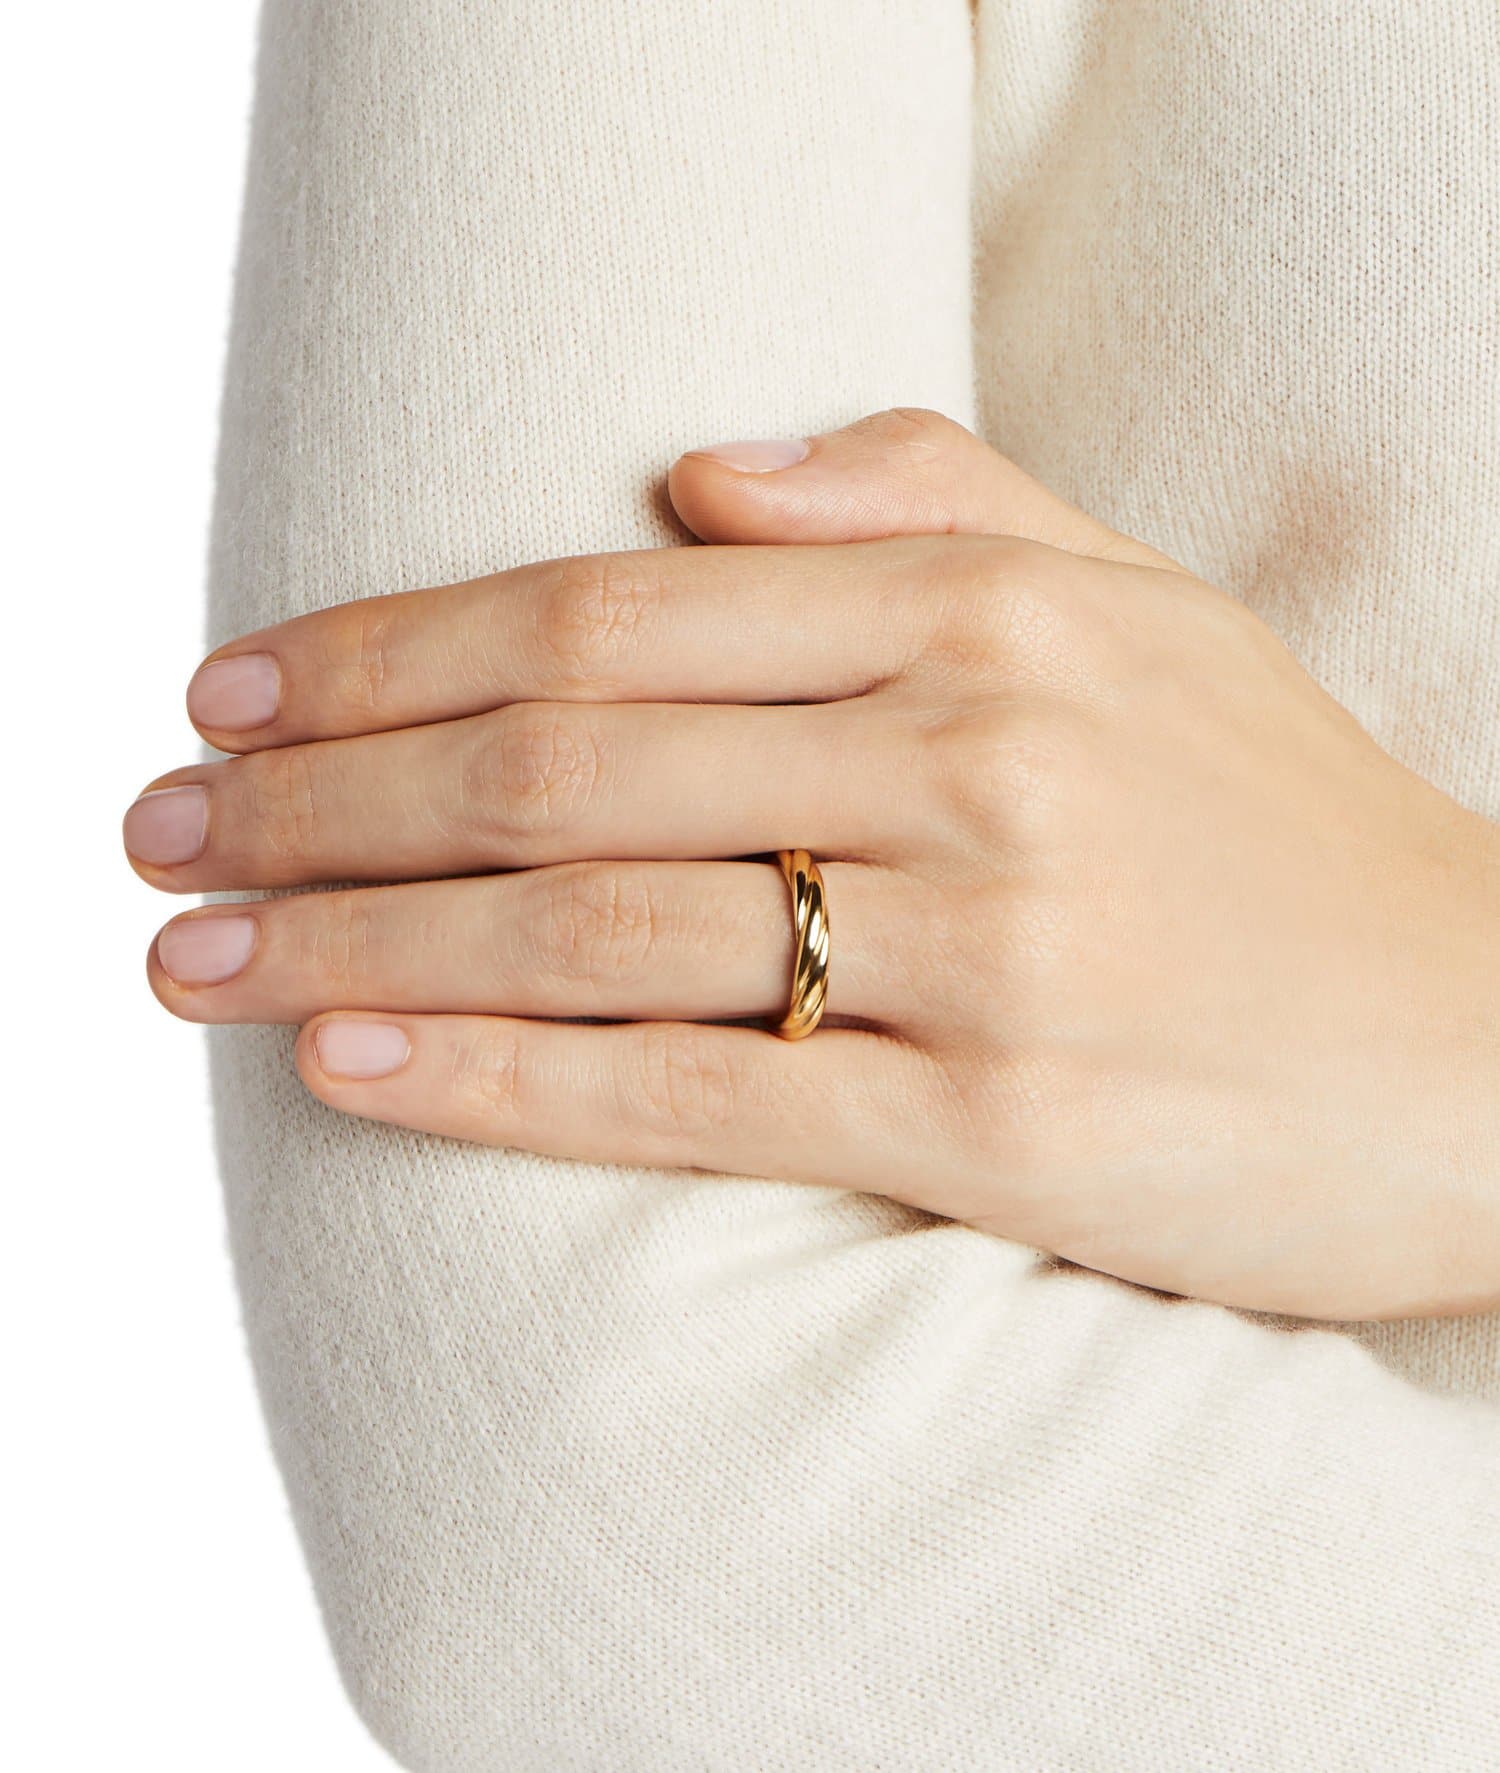 Ecological Gold Wedding Ring for Man or Woman